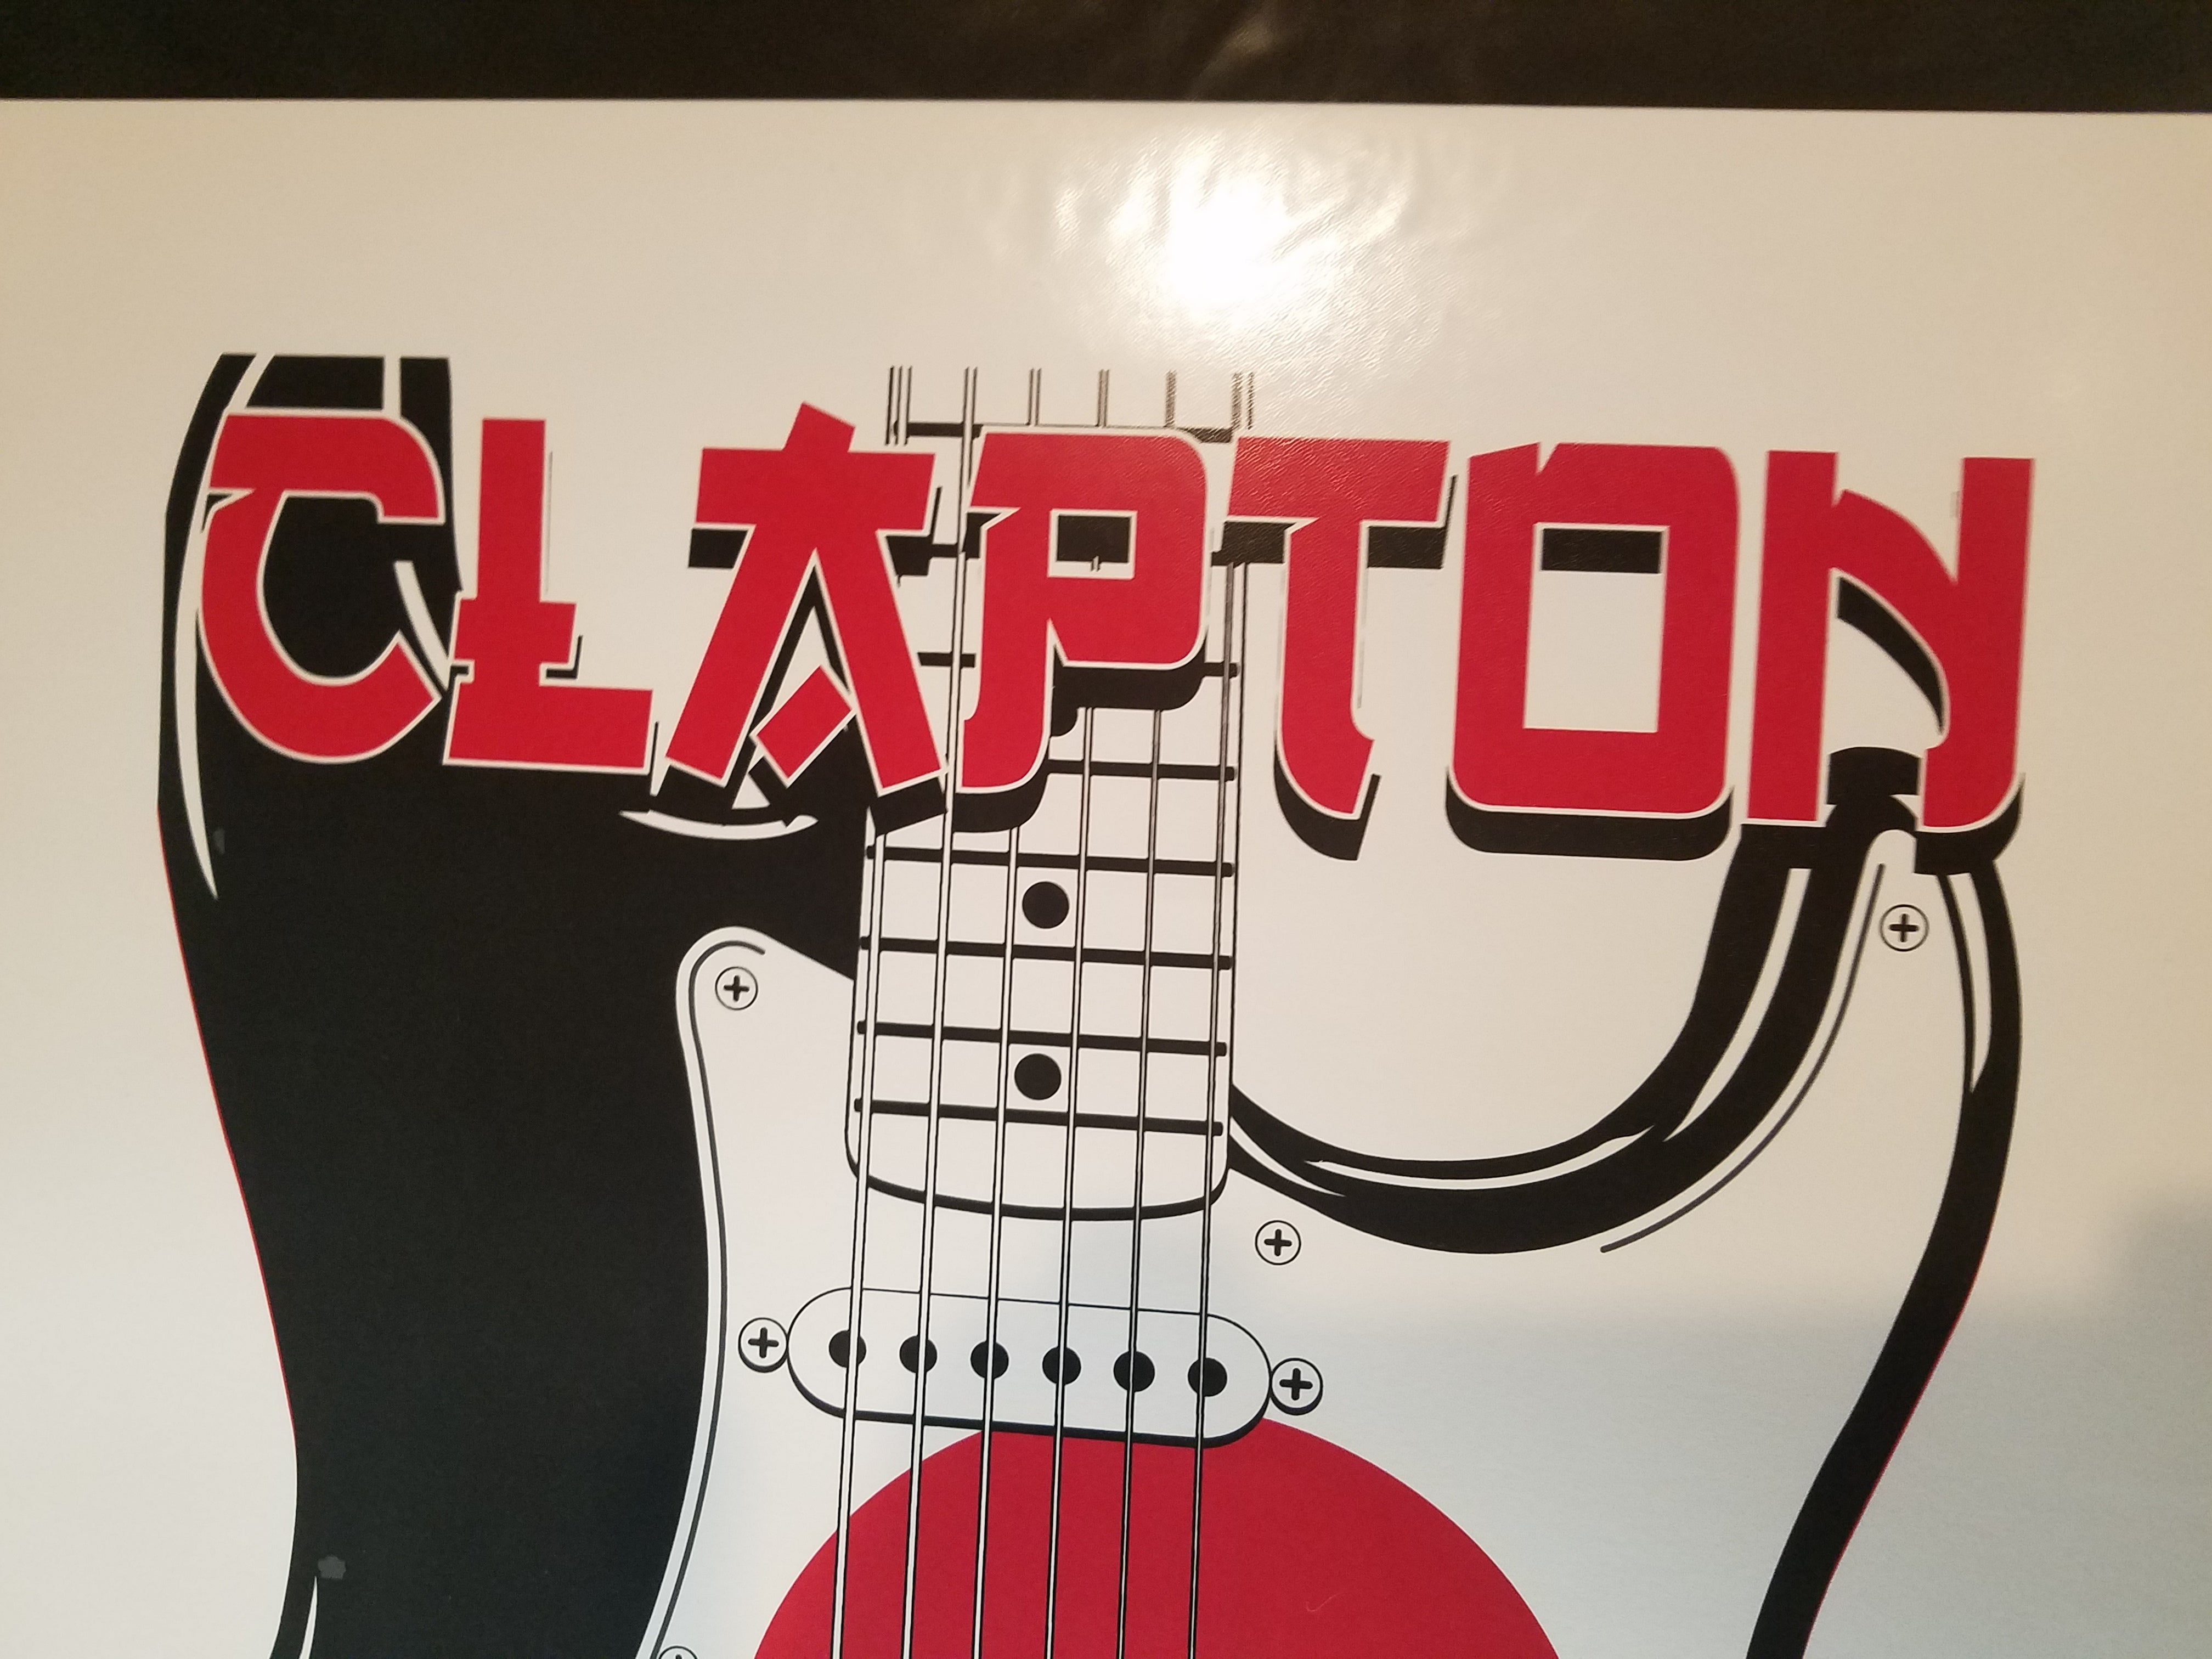 Title:  Eric Clapton - Budokan 2019  Edition:  xx/500  Type: Hand Screen printed poster  Size:  14" x 20"  Venue: Budokan Hall  Location:  Tokyo, Japan  Notes:  2019 Limited edition screen printed poster of 1000, Poster is numbered 76/1000 in pencil.  In house and ready to ship!